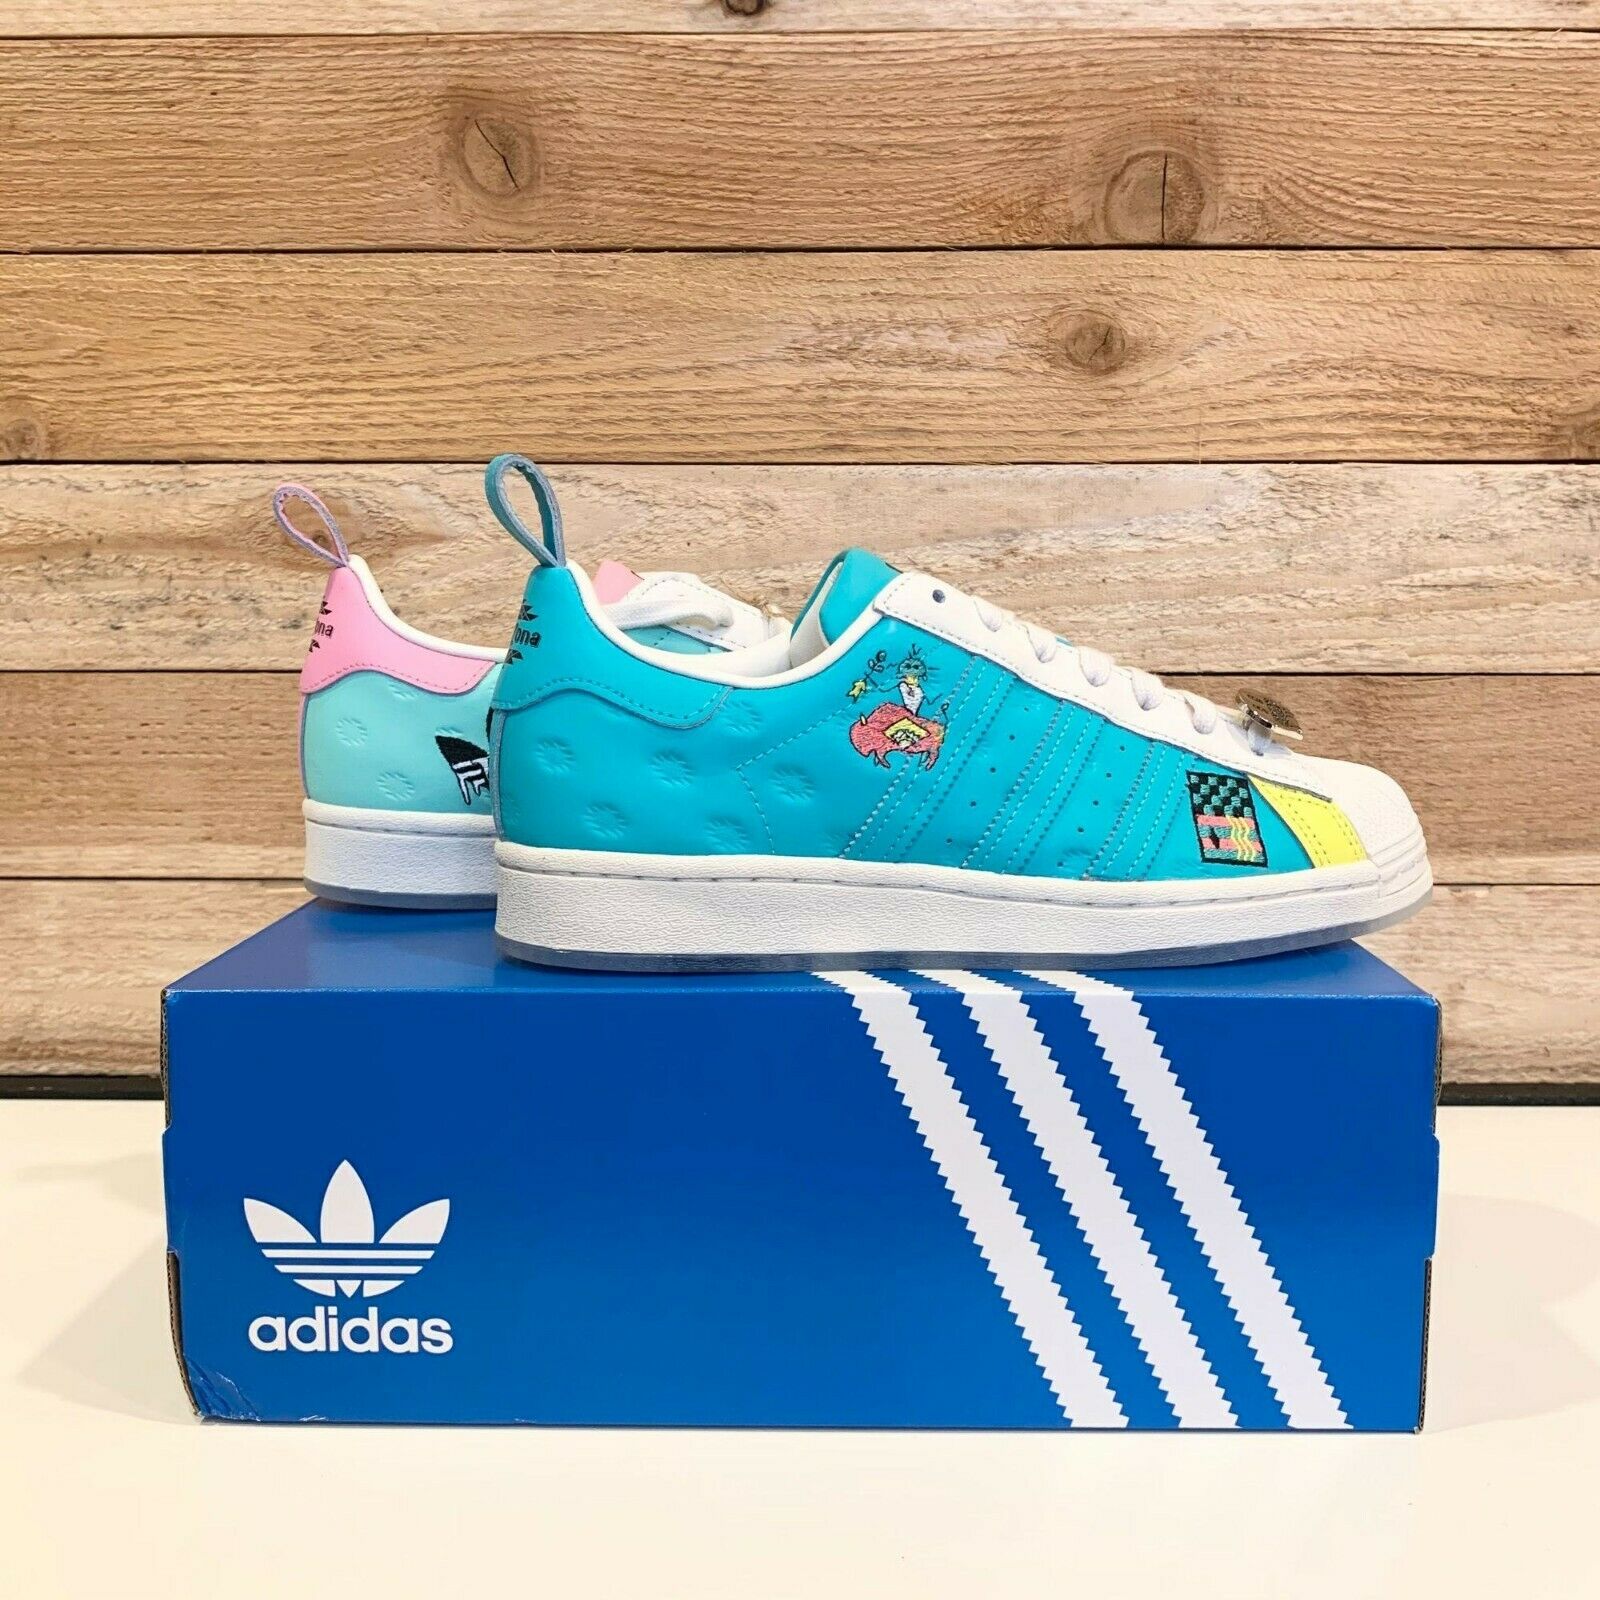 Adidas Superstar Arizona Shoes Limited edition Men's Size 12 NIB Teal Authentic